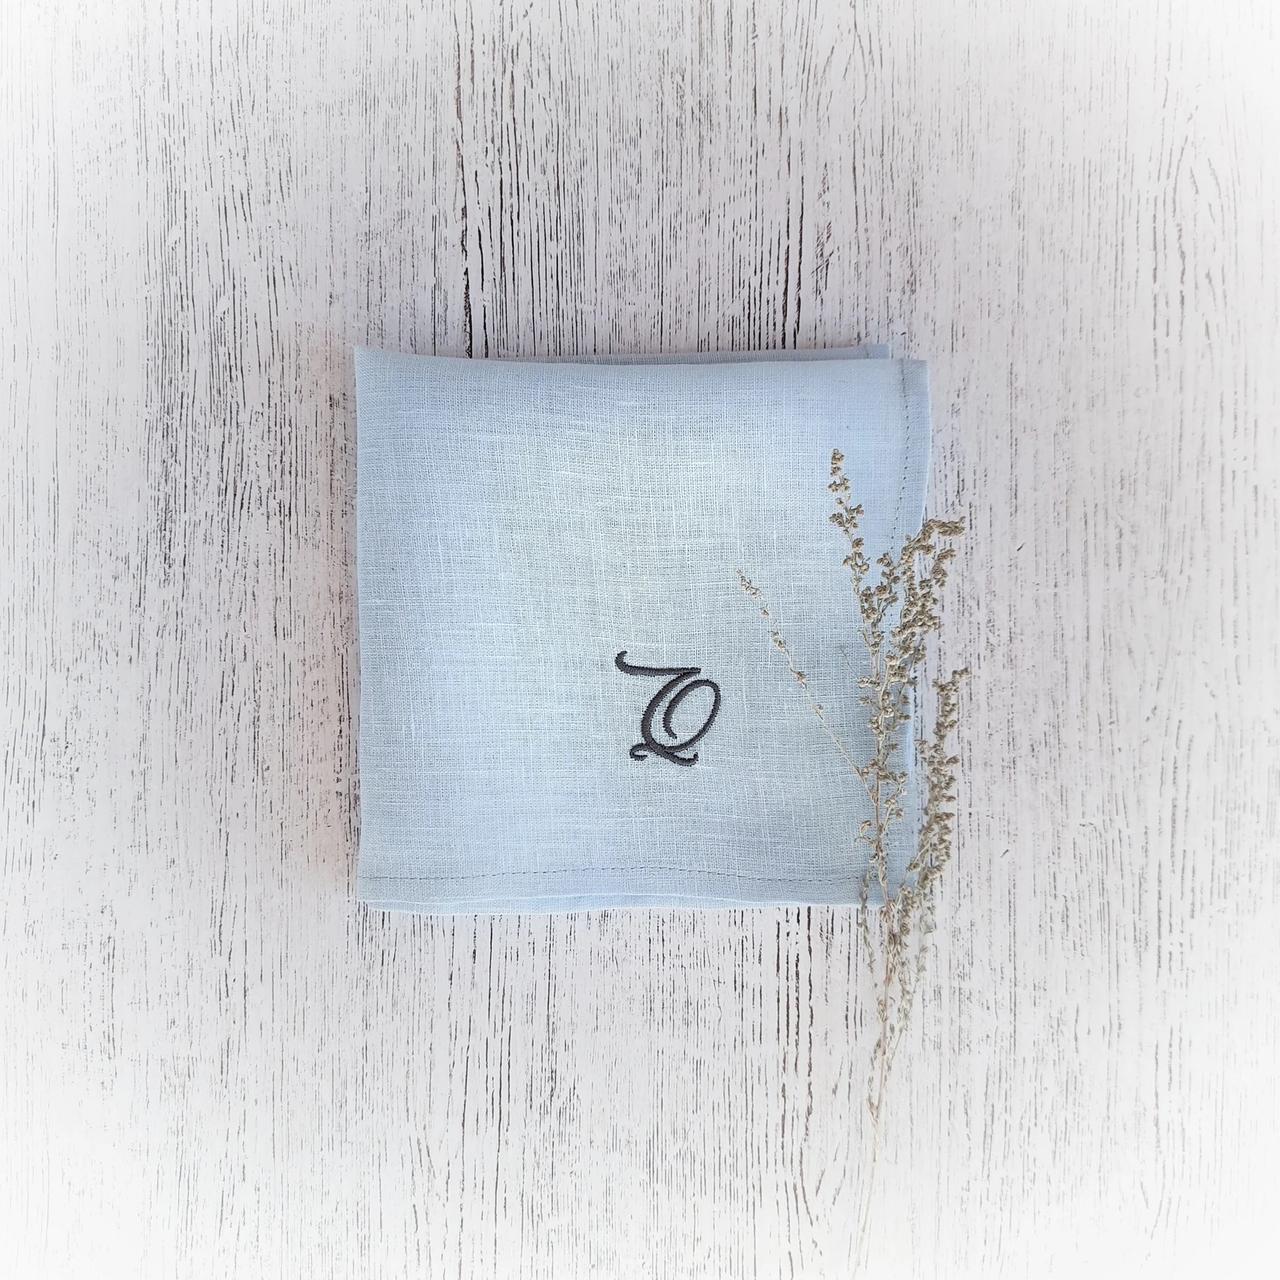 Light blue linen handkerchief with a 'Q' embroidered in navy thread next to a spring of dried flowers on a light wooden tablecloth